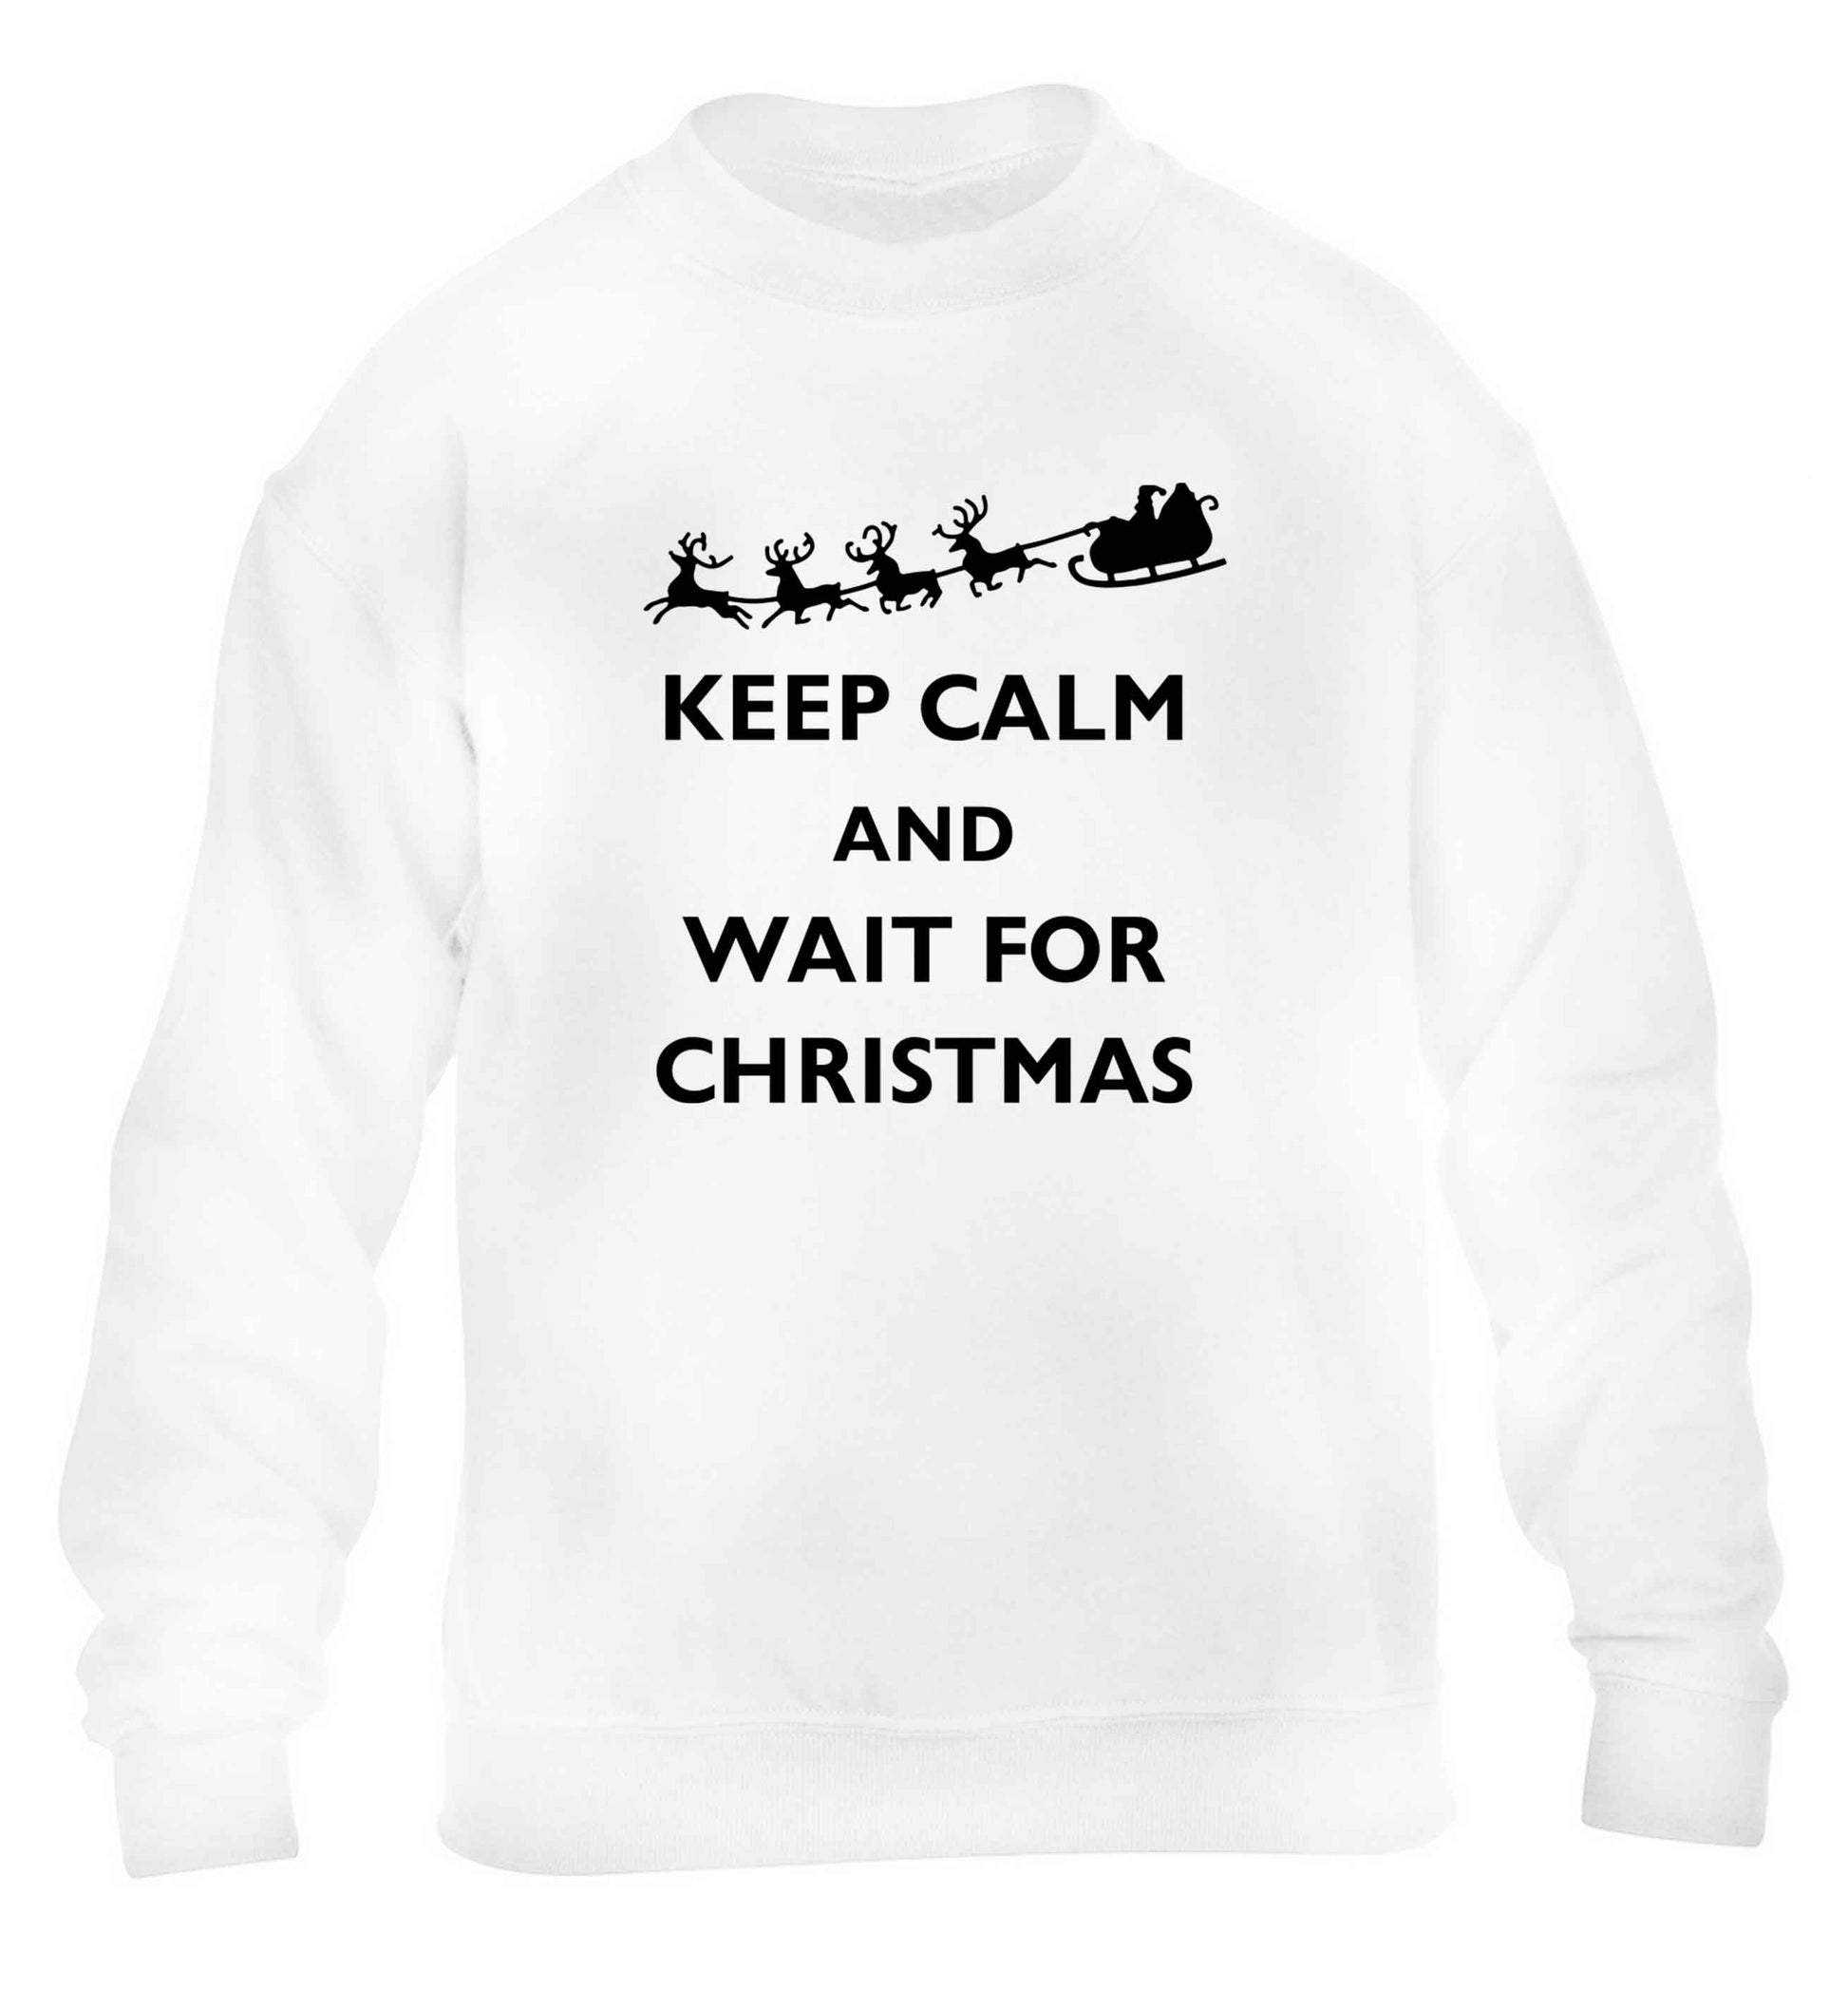 Keep calm and wait for Christmas children's white sweater 12-13 Years